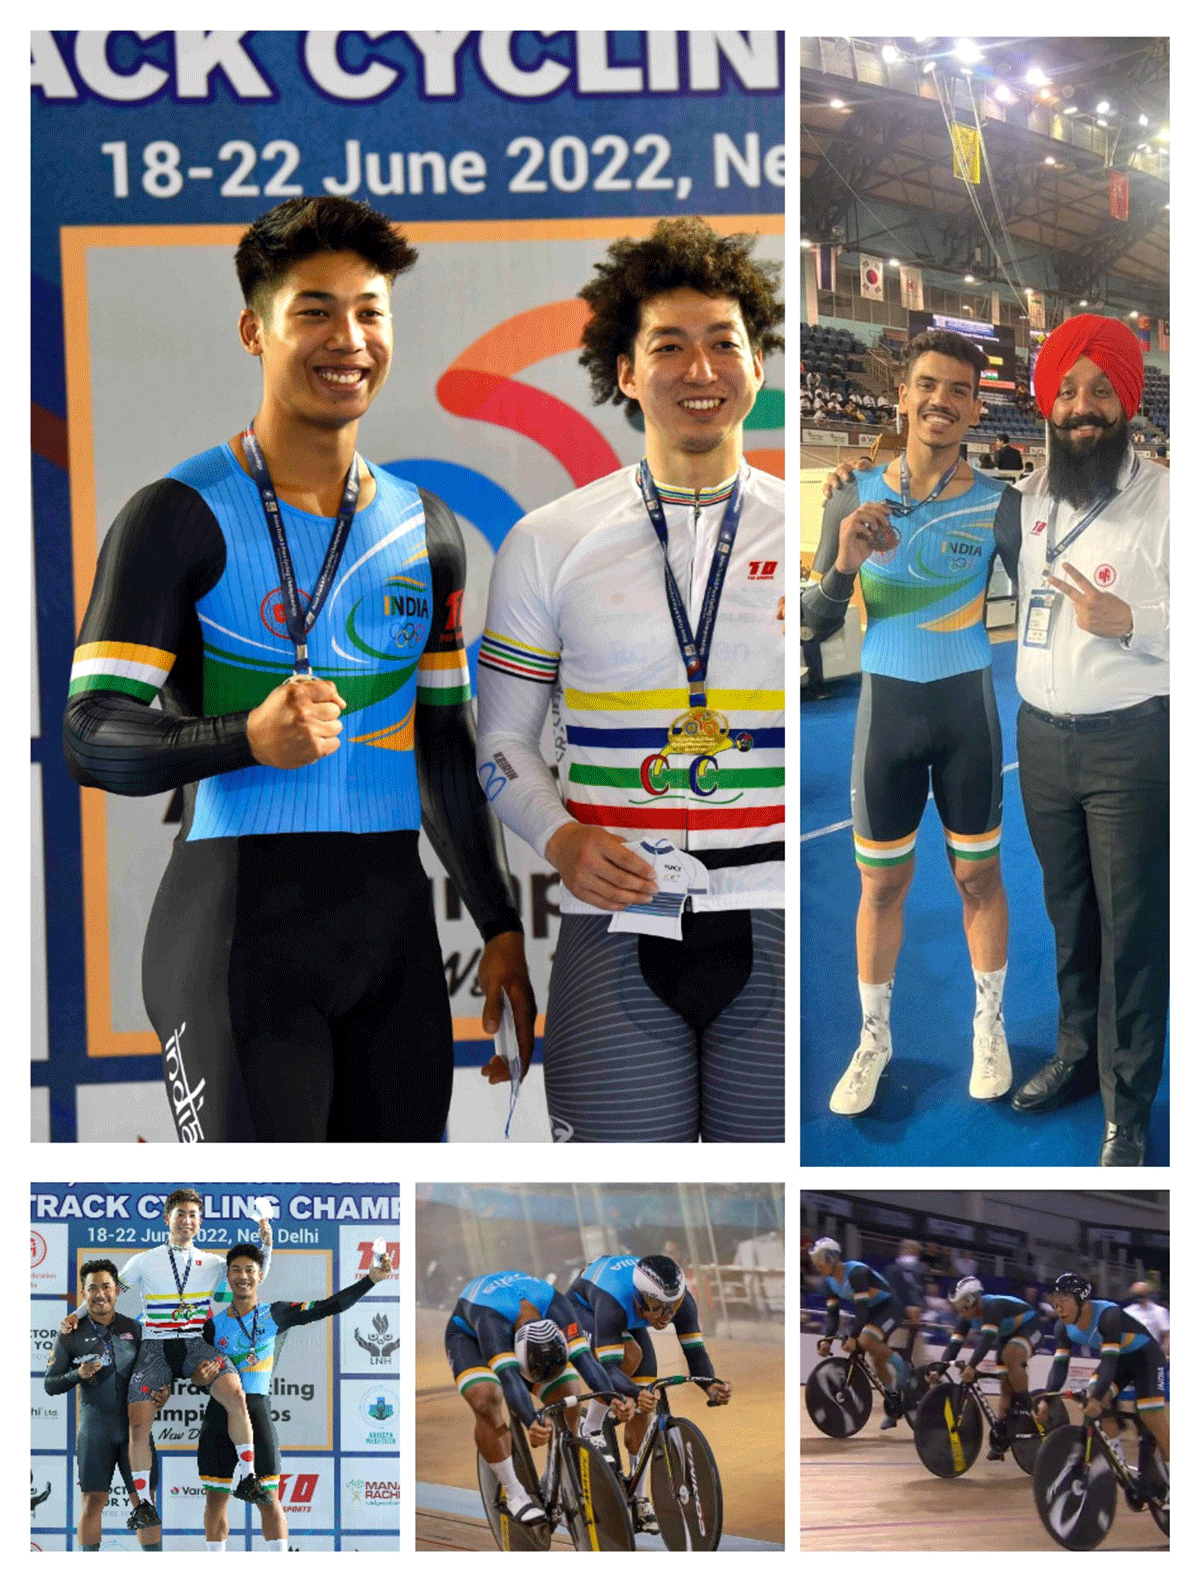 Ronaldo's silver on Wednesday was his third medal of the championships. He had earlier won bronze medals in 1km time trial and team sprint events.